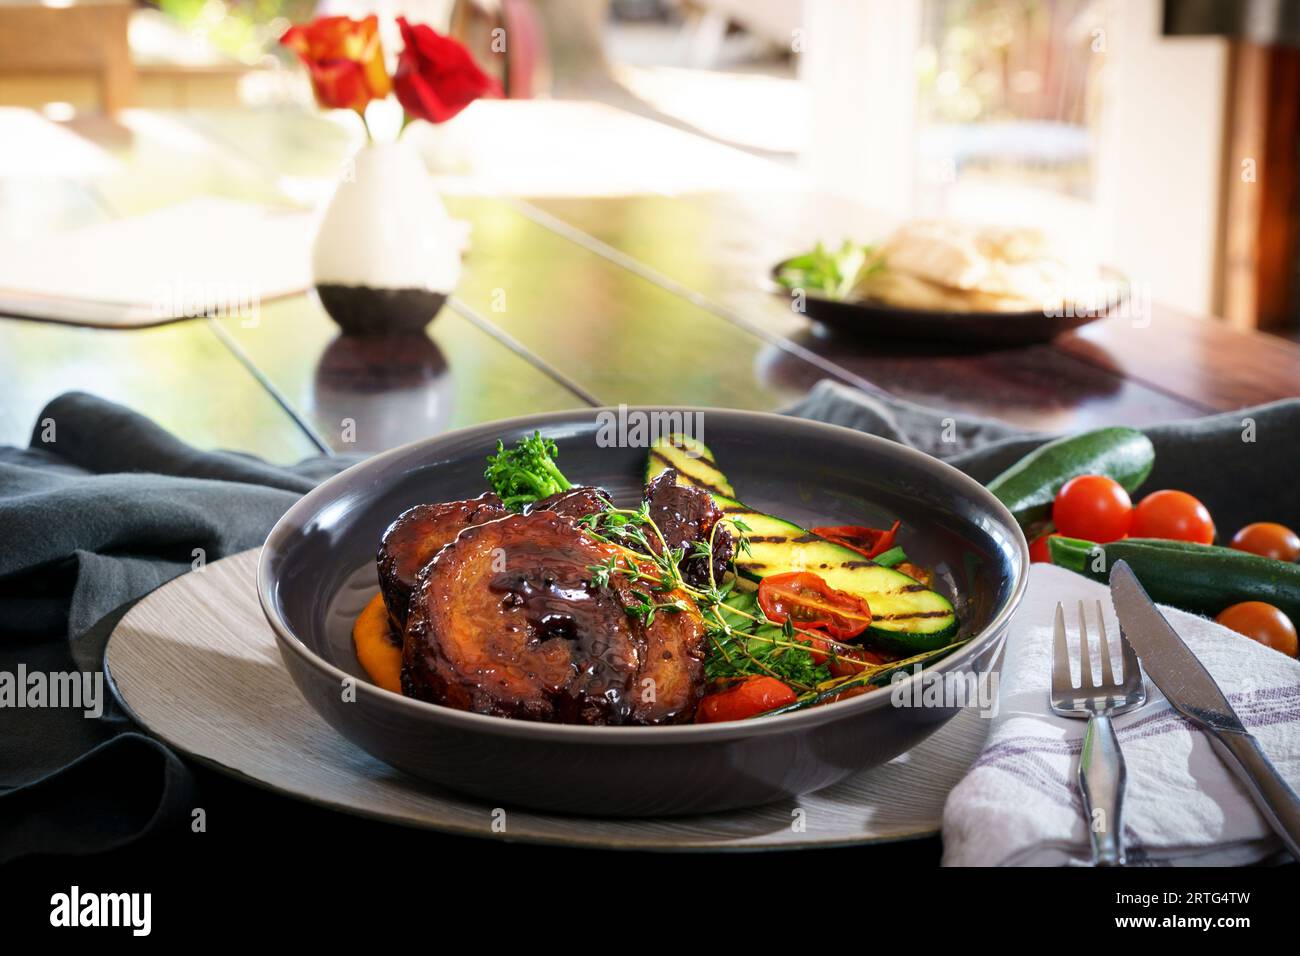 pork belly meal plated for serving showing garnishings and a setting Stock Photo